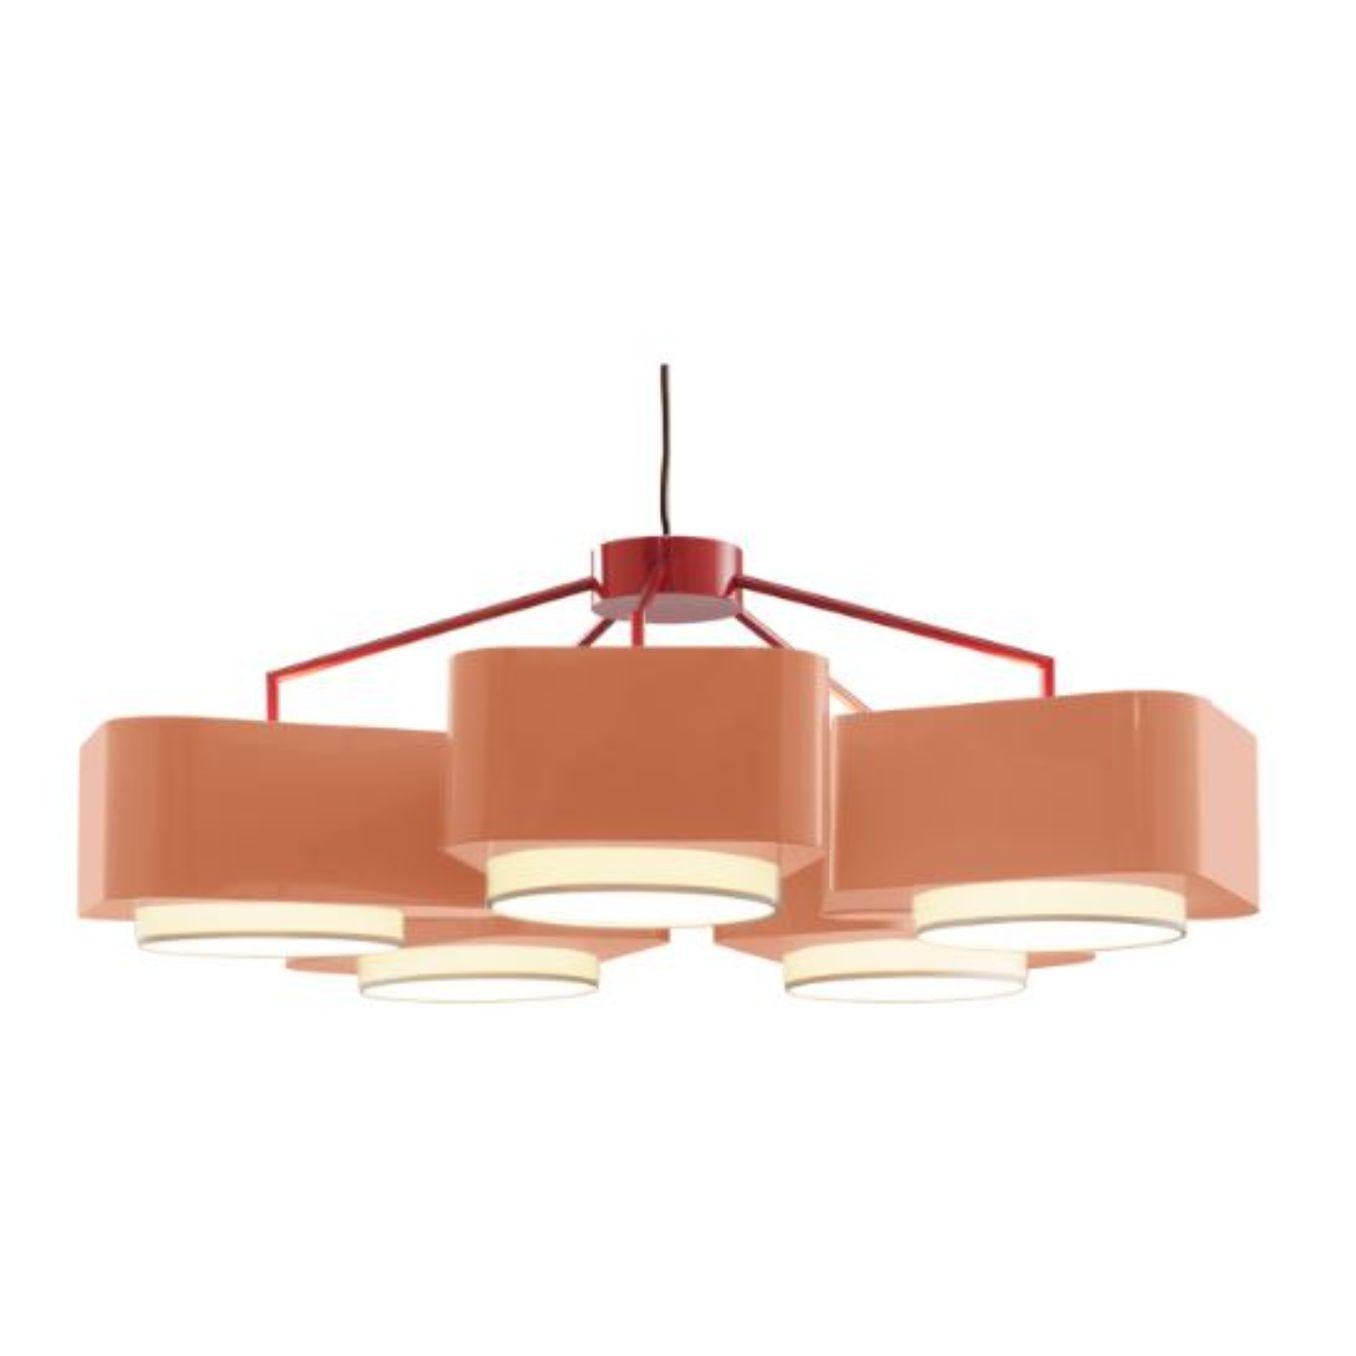 Lipstick and Salmon carousel suspension lamp by Dooq
Dimensions: W 110 x D 110 x H 40 cm
Materials: lacquered metal.
abat-jour: cotton
Also available in different colors.

Information:
230V/50Hz
E27/5x20W LED
120V/60Hz
E26/5x15W LED
bulbs